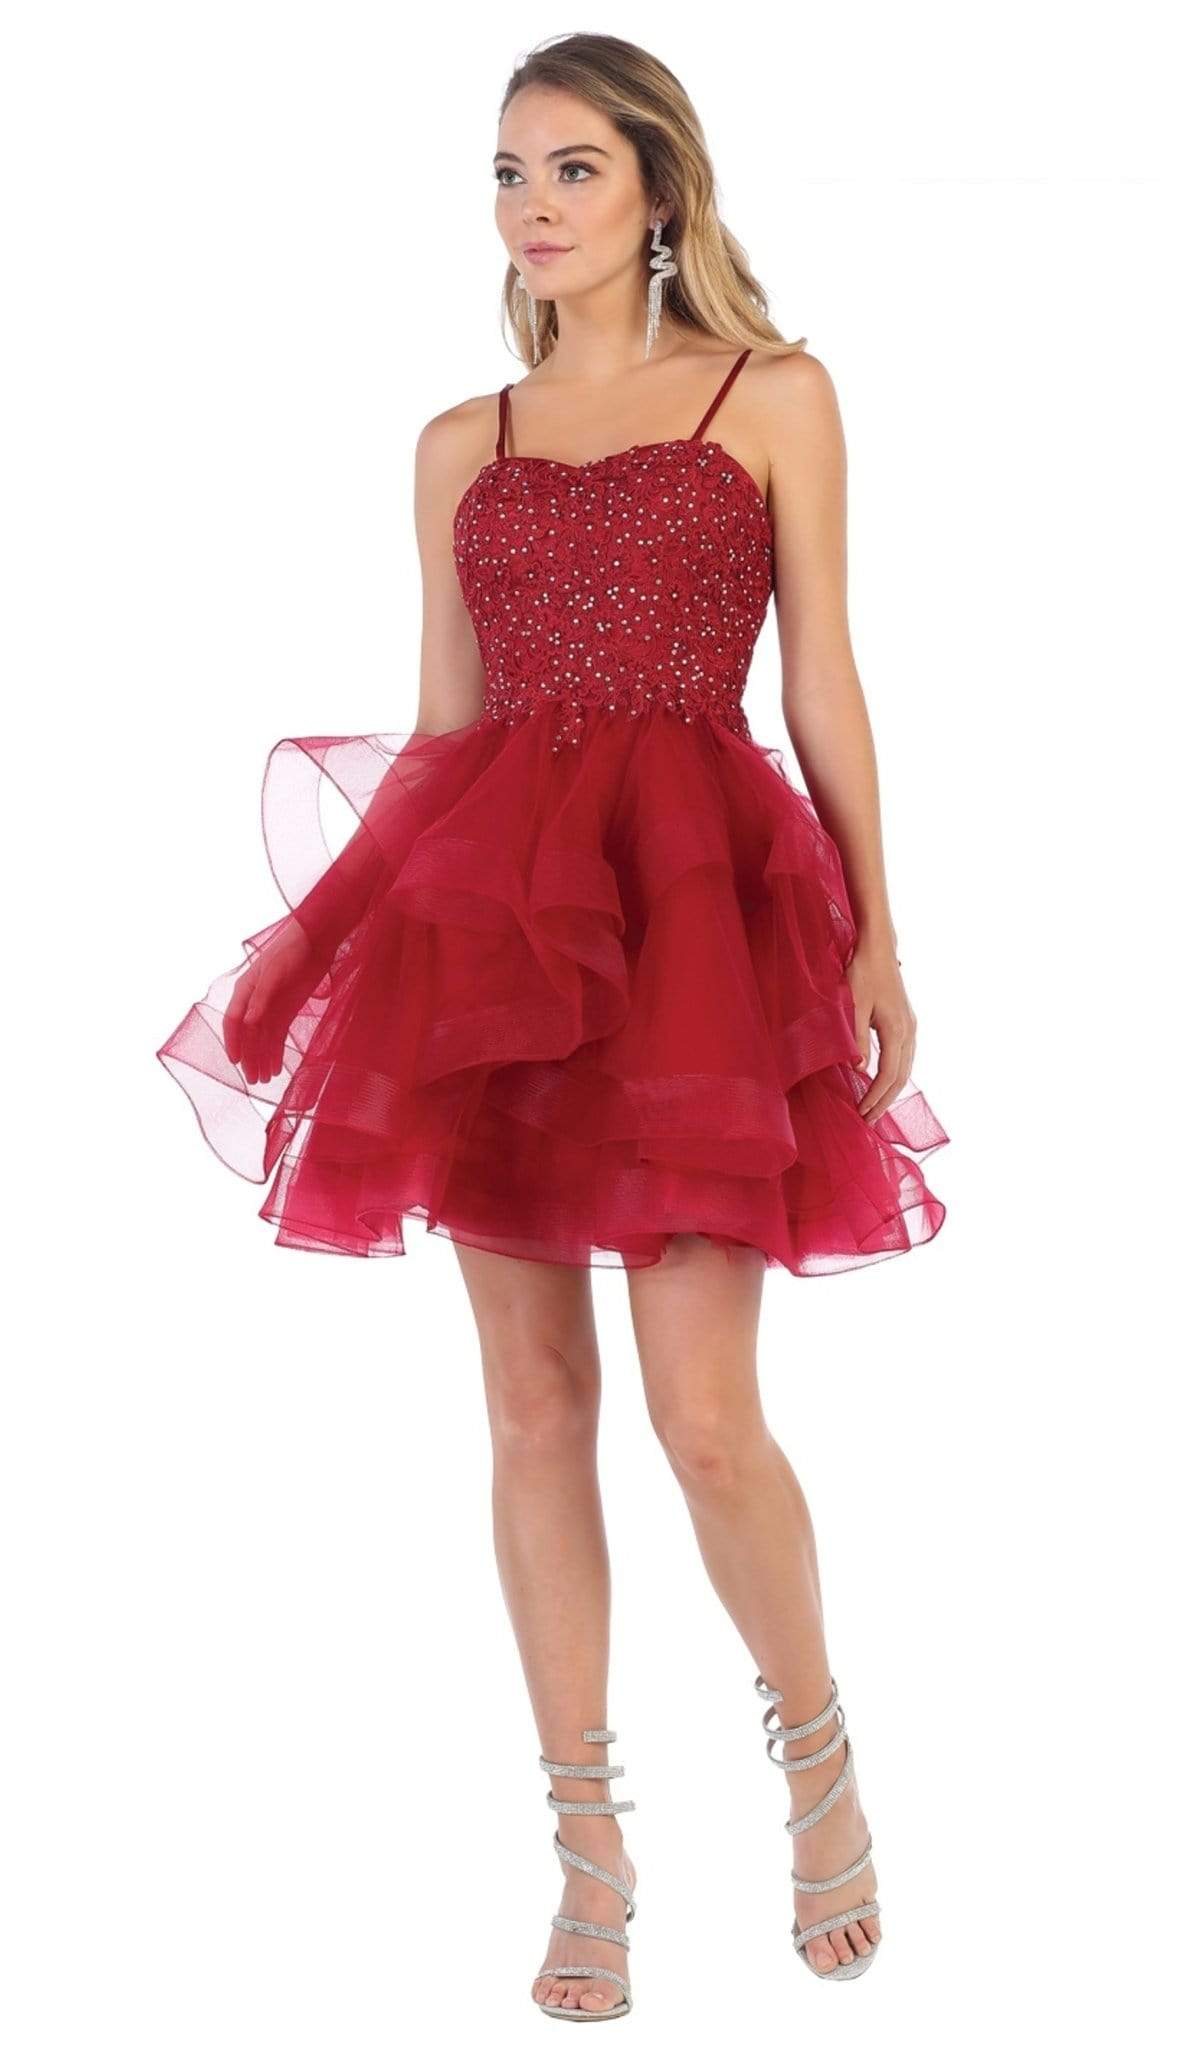 May Queen - RQ7720 Appliqued Sweetheart Bodice A-Line Dress